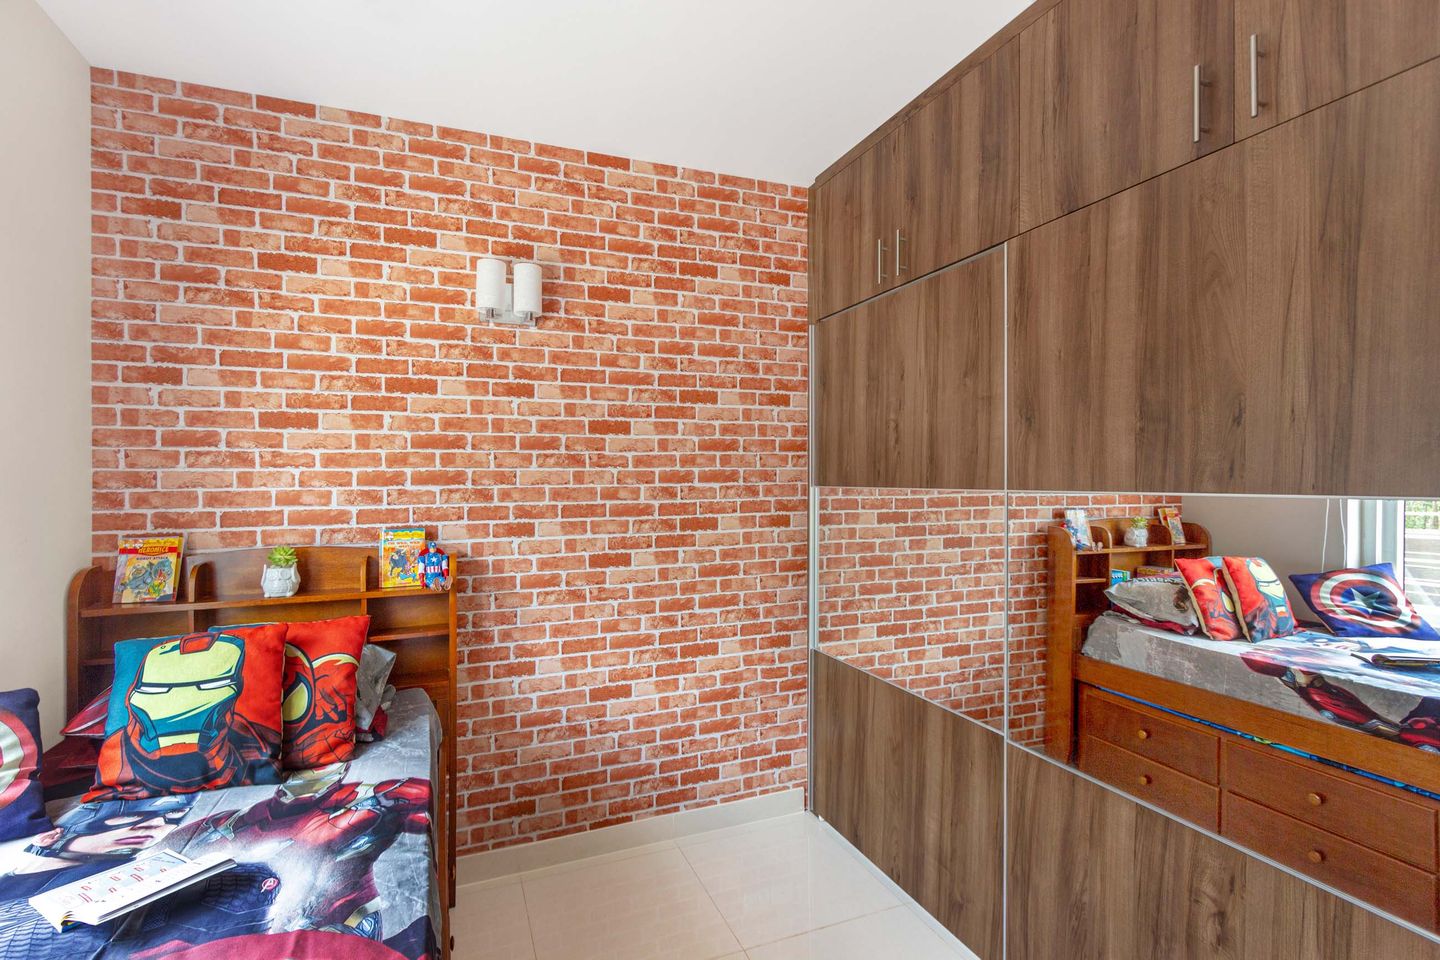 Boys Room Design With 2-Door Wooden Sliding Wardrobe With Mirror, Red Brick Accent Wall And Wooden Bed - Livspace